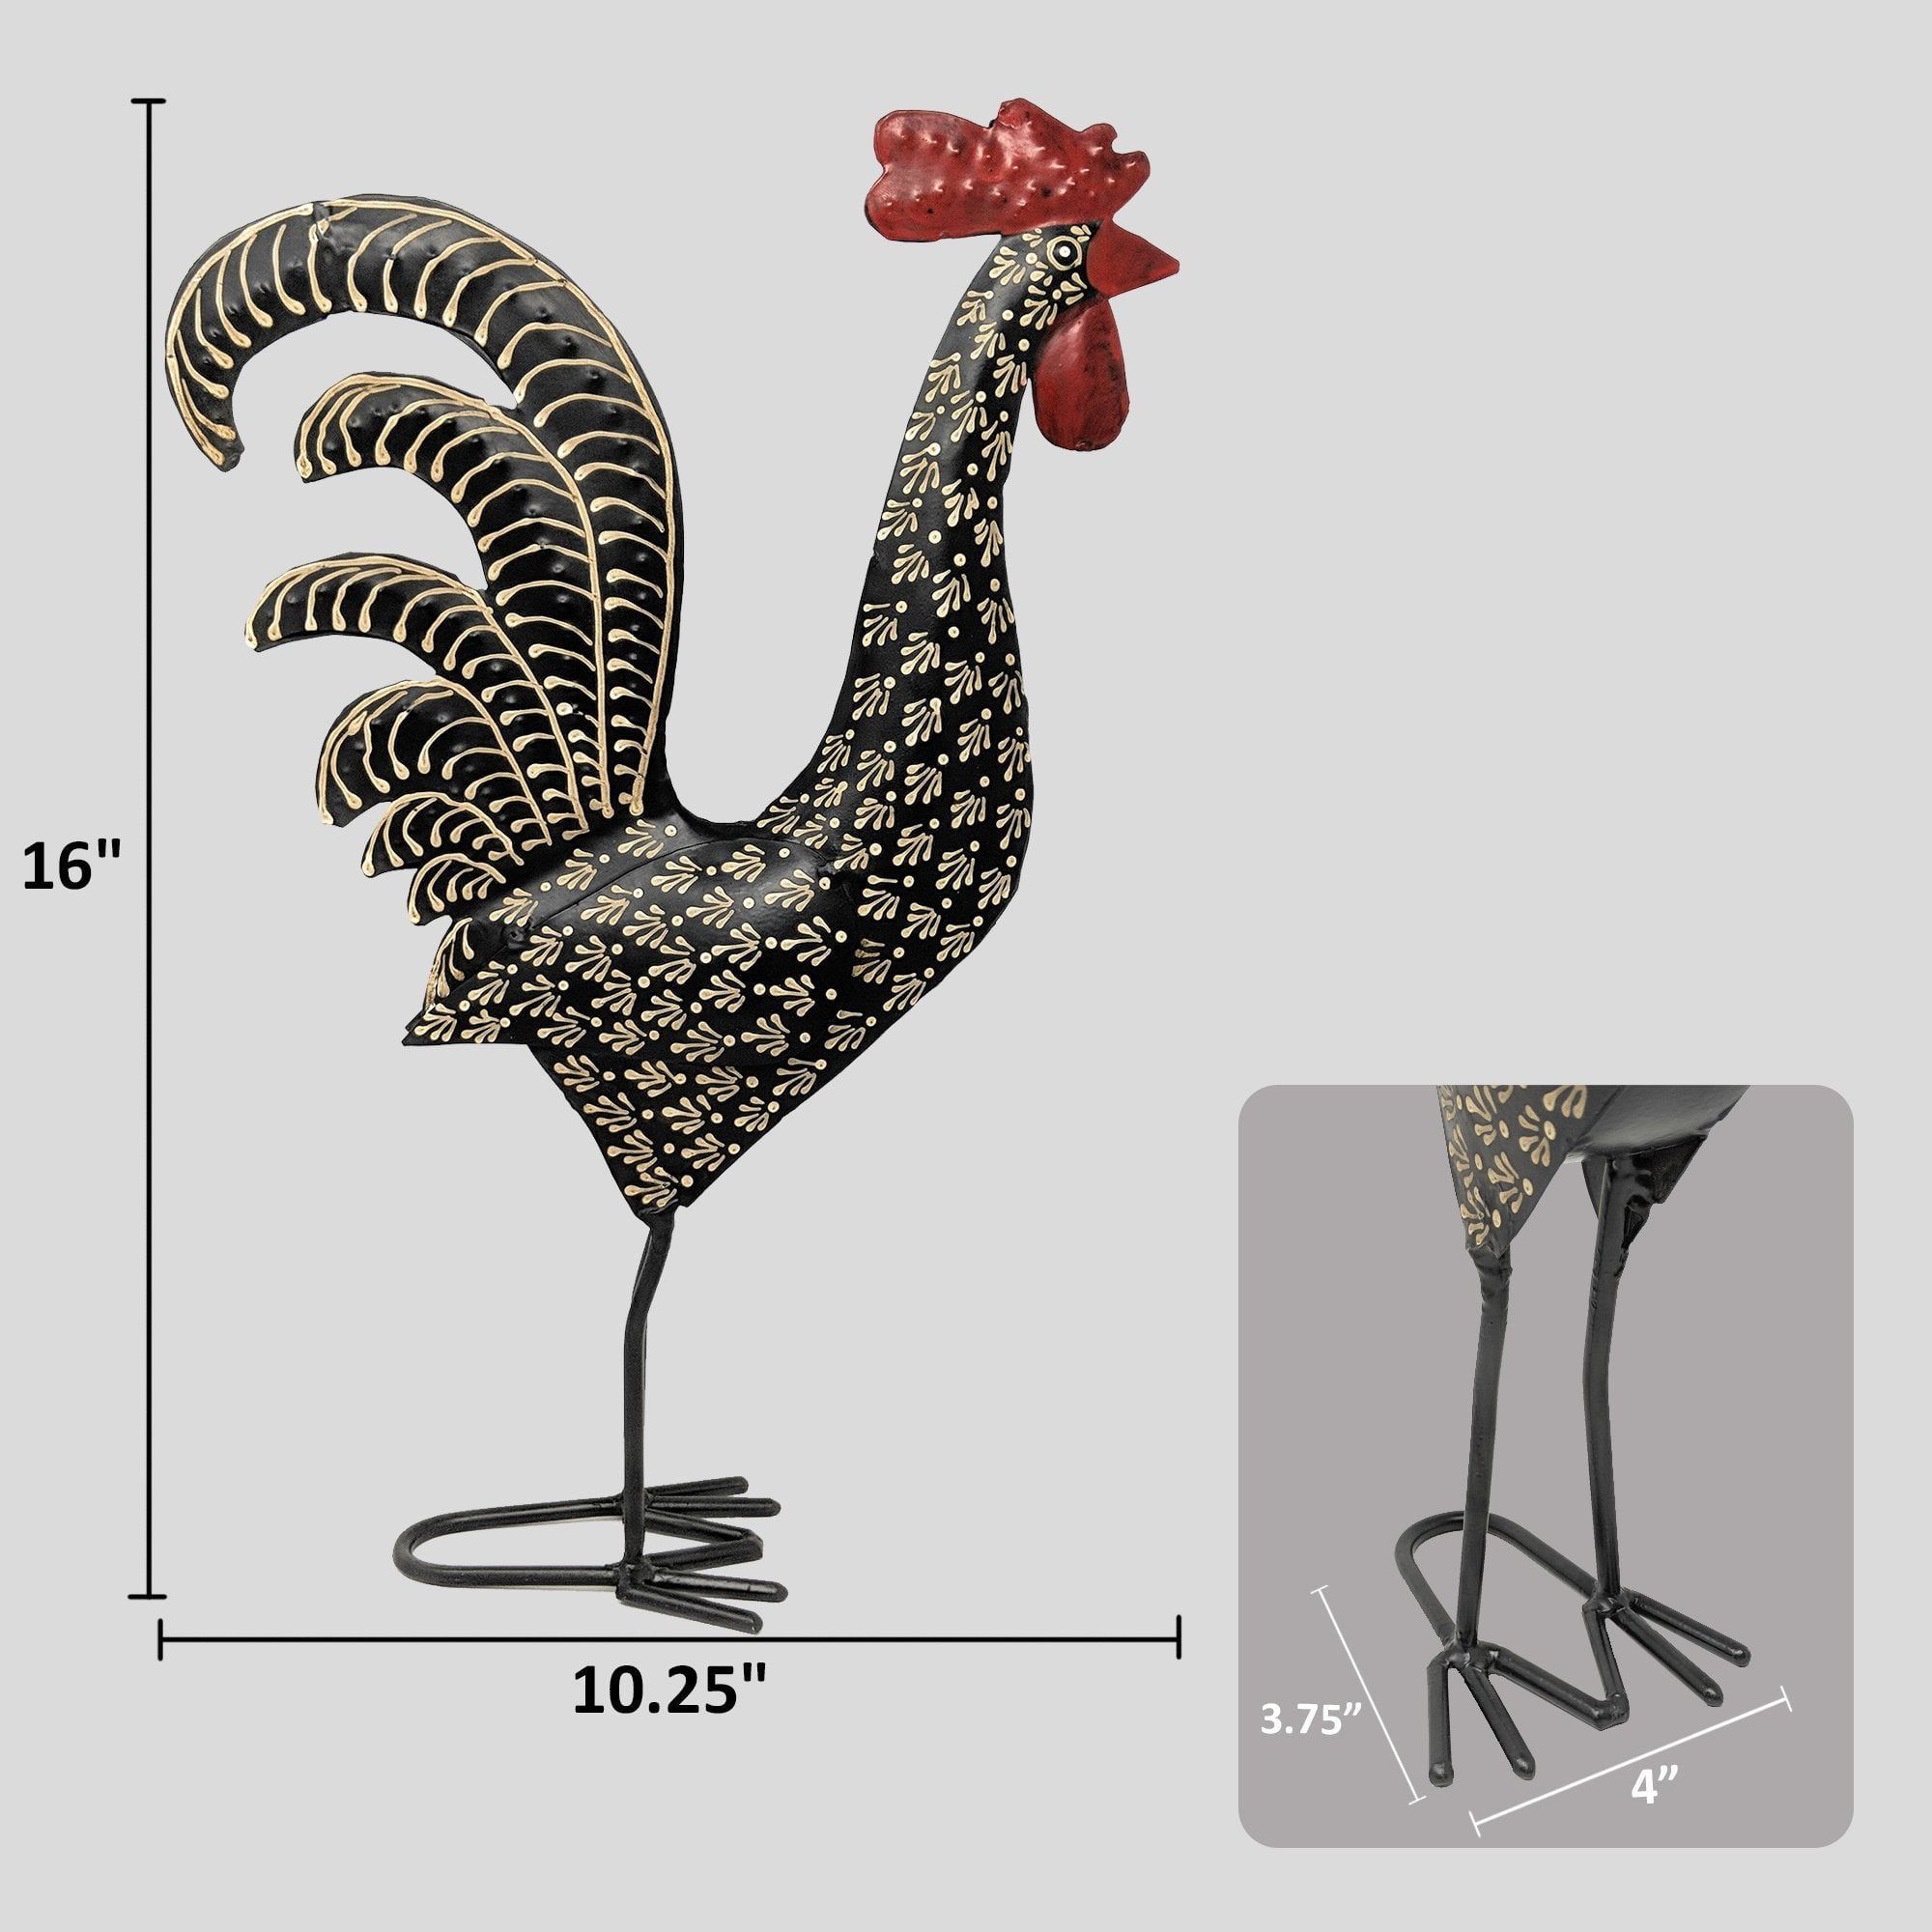 Red Bandana Metal Chicken/Rooster Decor Statue Handcrafted by Metal Artisans 